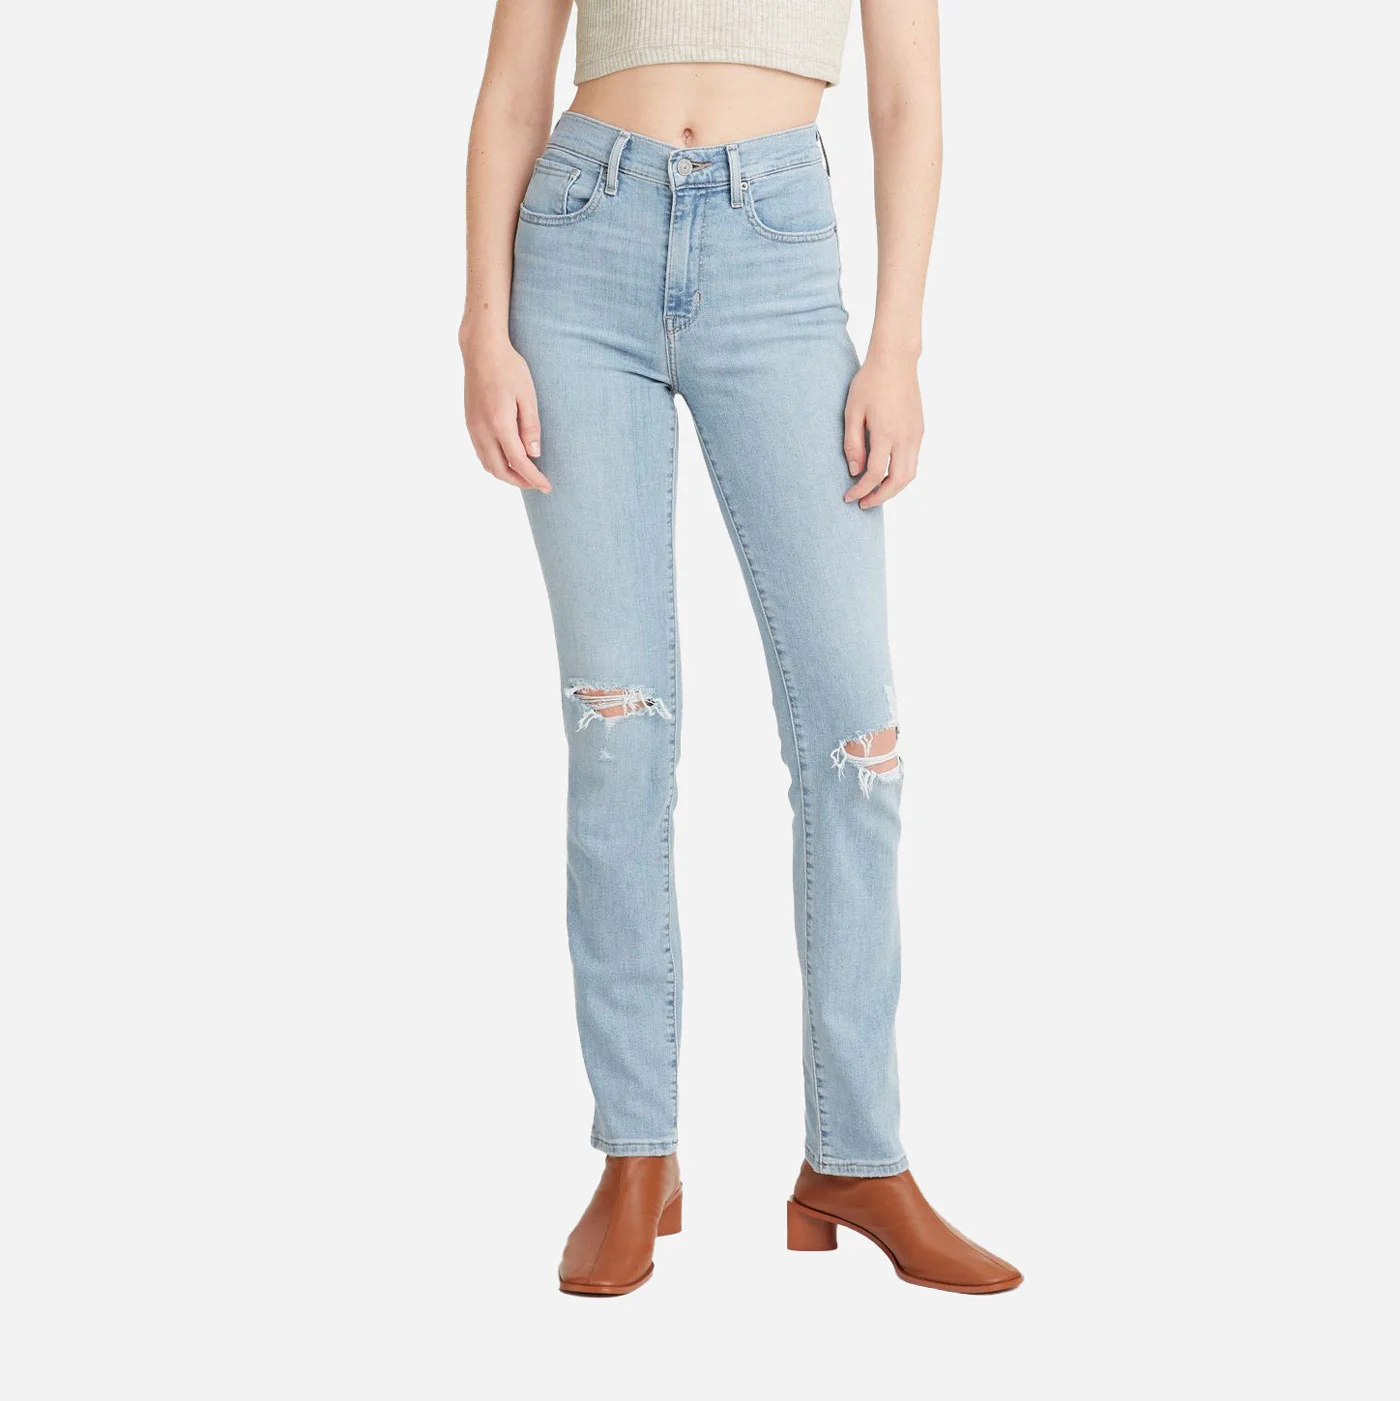 Levis Women's 724 High Rise Straight Fit Jean - Mind My Business